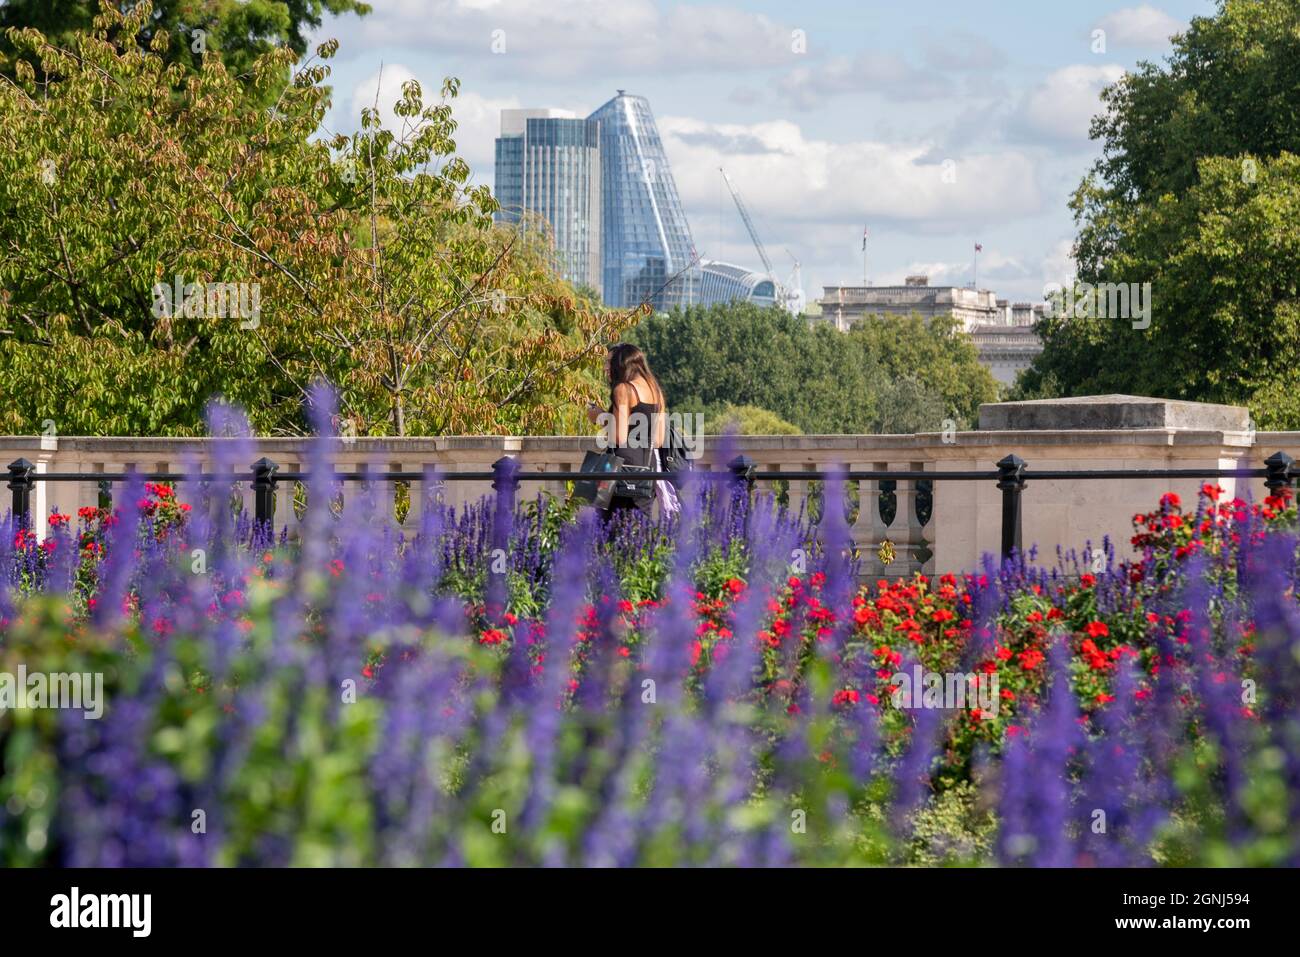 Colourful plants in the flower beds of Buckingham Palace Memorial Gardens, London, UK, with females walking past and high rise city financial district Stock Photo